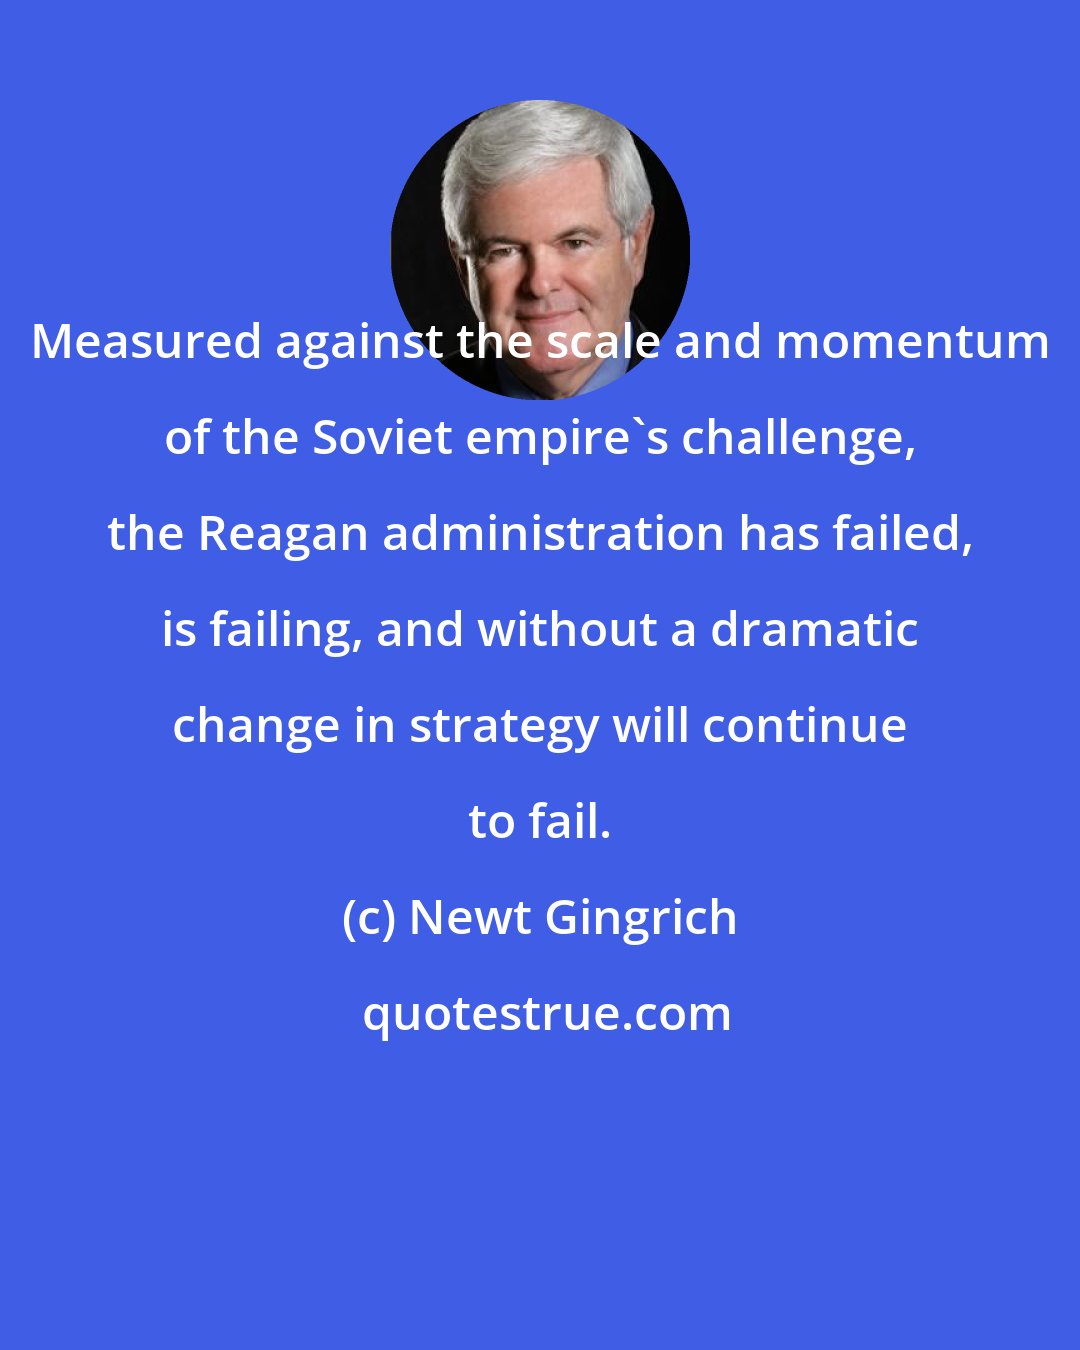 Newt Gingrich: Measured against the scale and momentum of the Soviet empire's challenge, the Reagan administration has failed, is failing, and without a dramatic change in strategy will continue to fail.